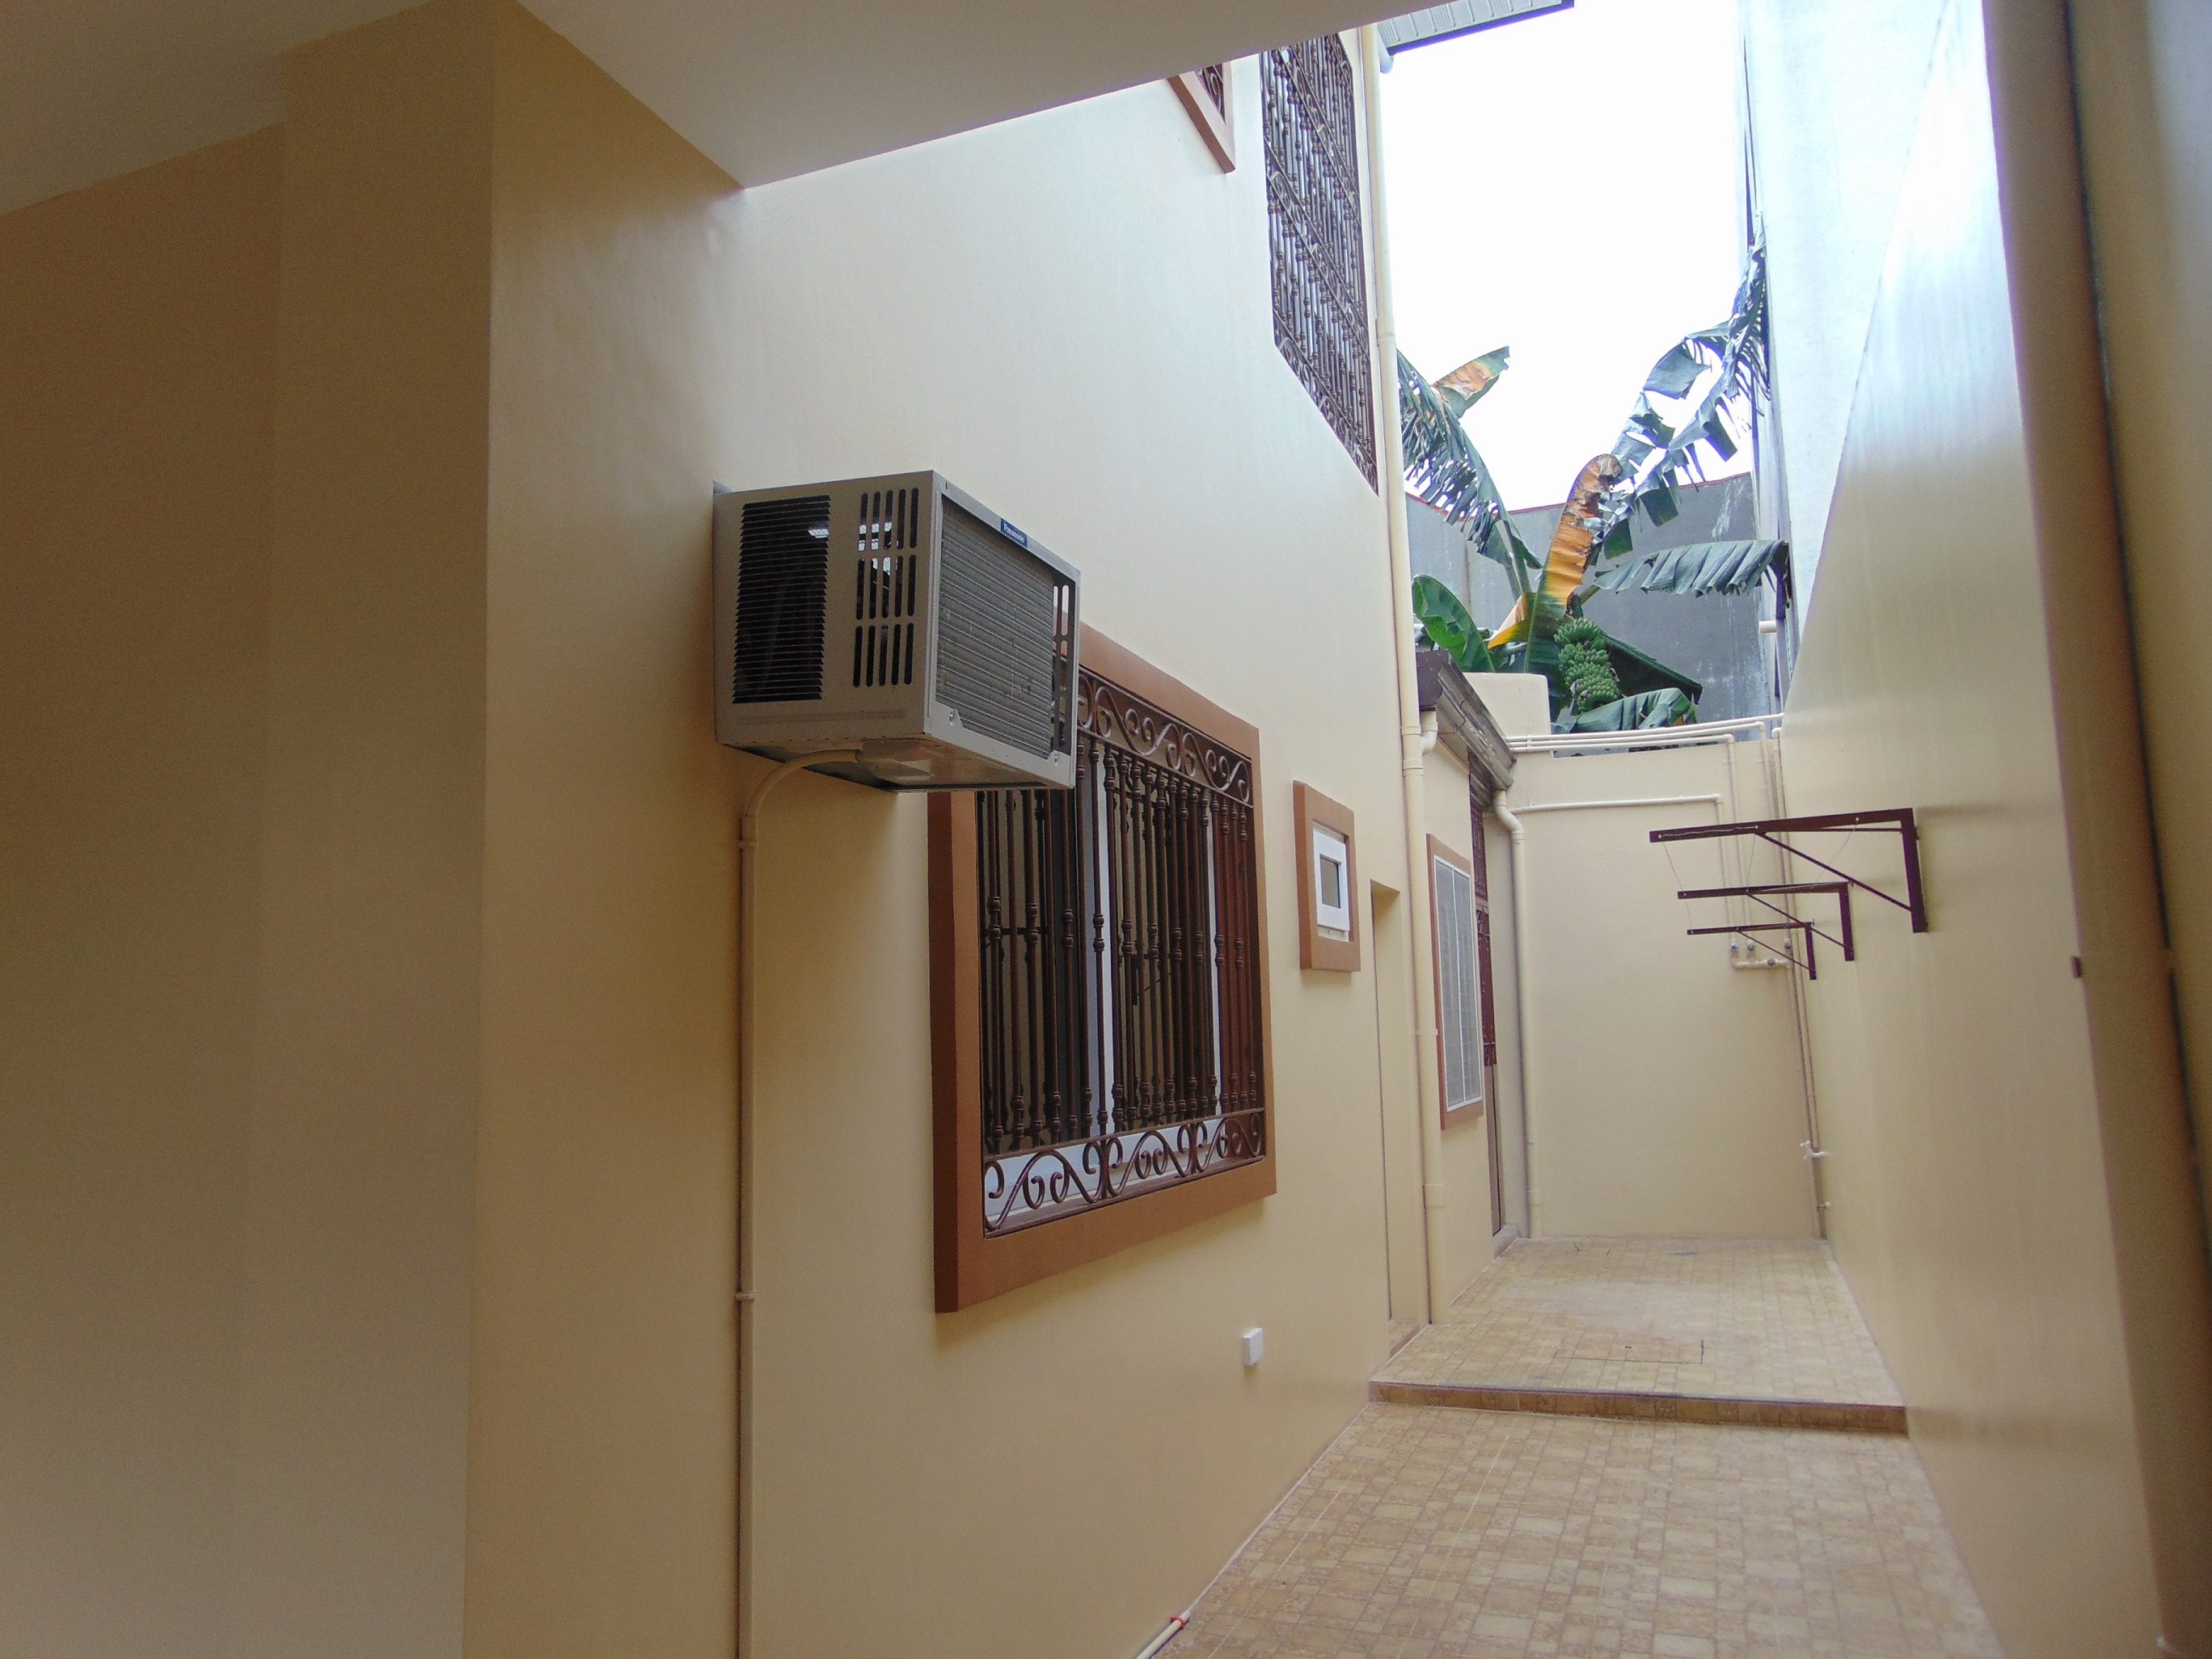 5-bedrooms-semi-furnished-duplex-house-located-in-mabolo